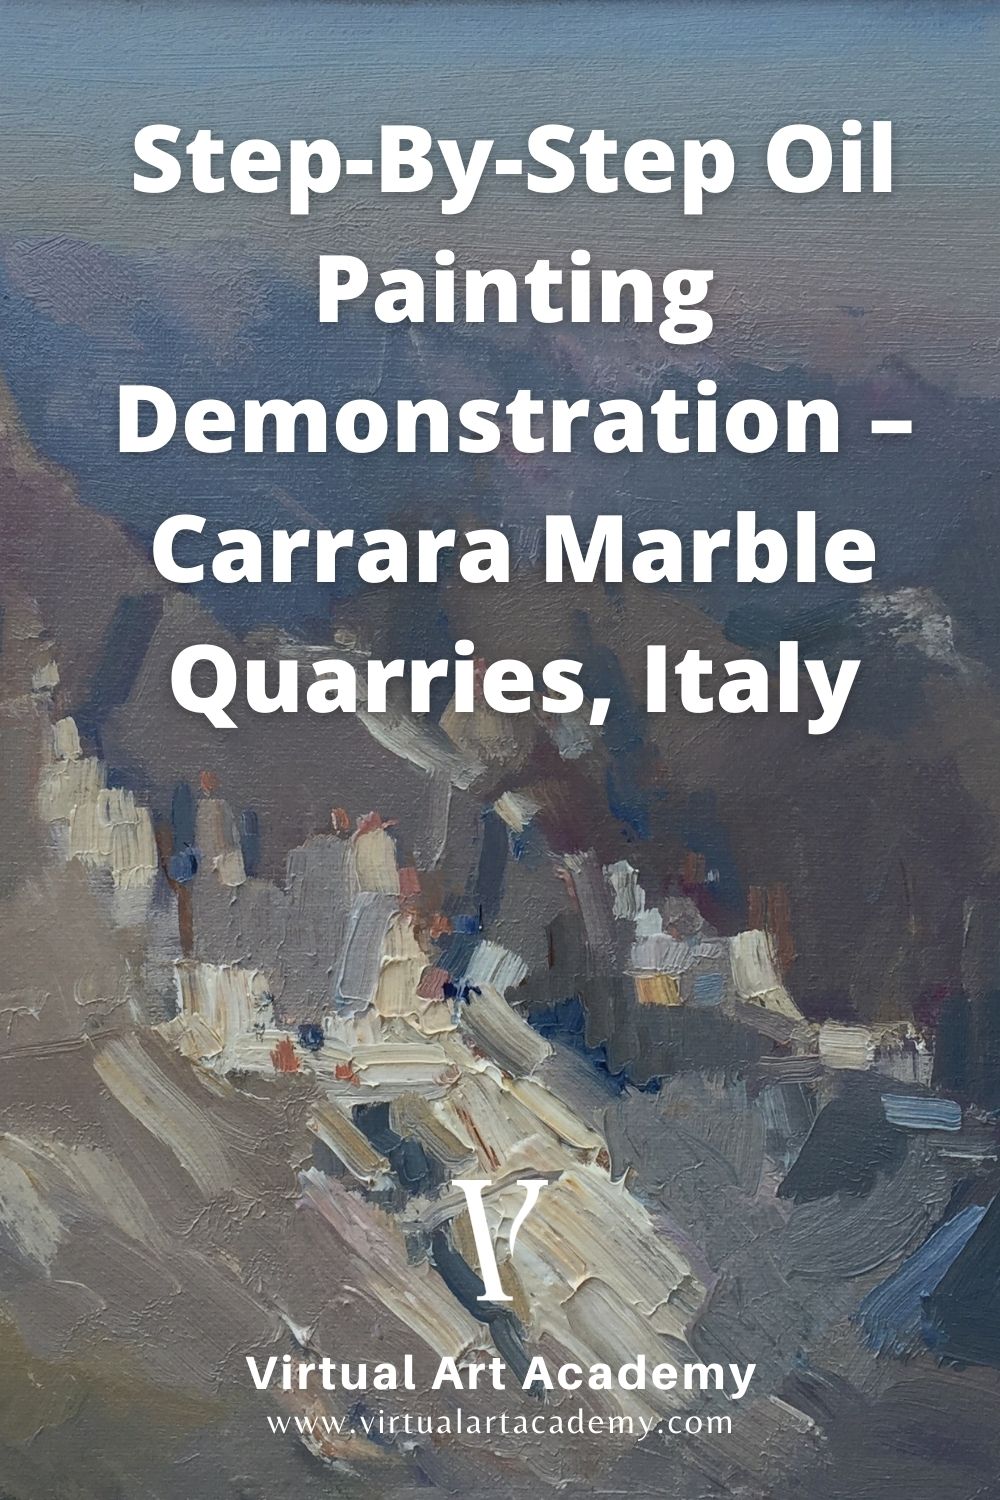 Step By Step Oil Painting Demonstration - Carrara Marble Quarries, Italy